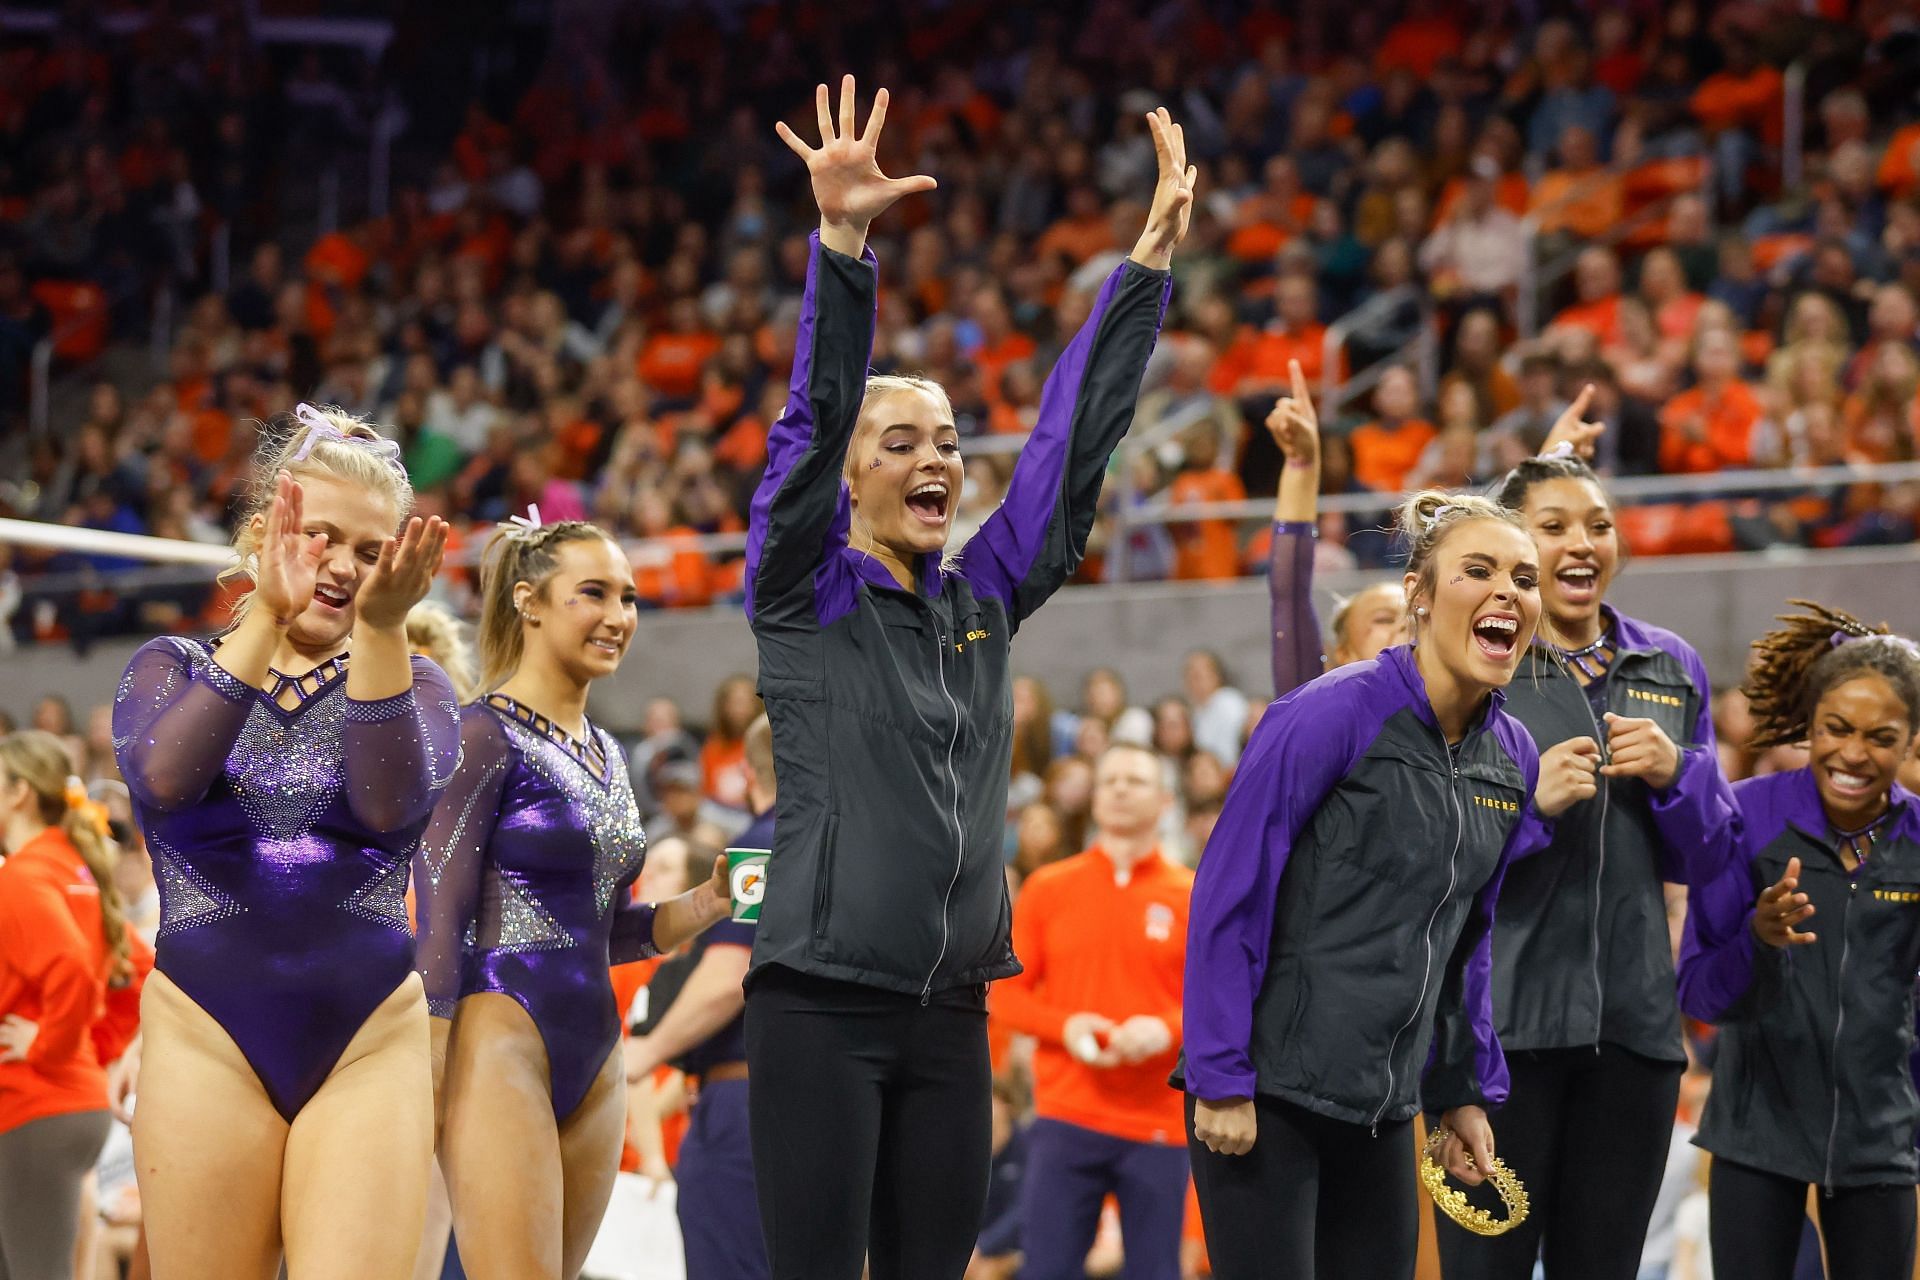 Despite facing her senior year at LSU Gymnastics, Livvy Dunne will continue to be a social media influencer.